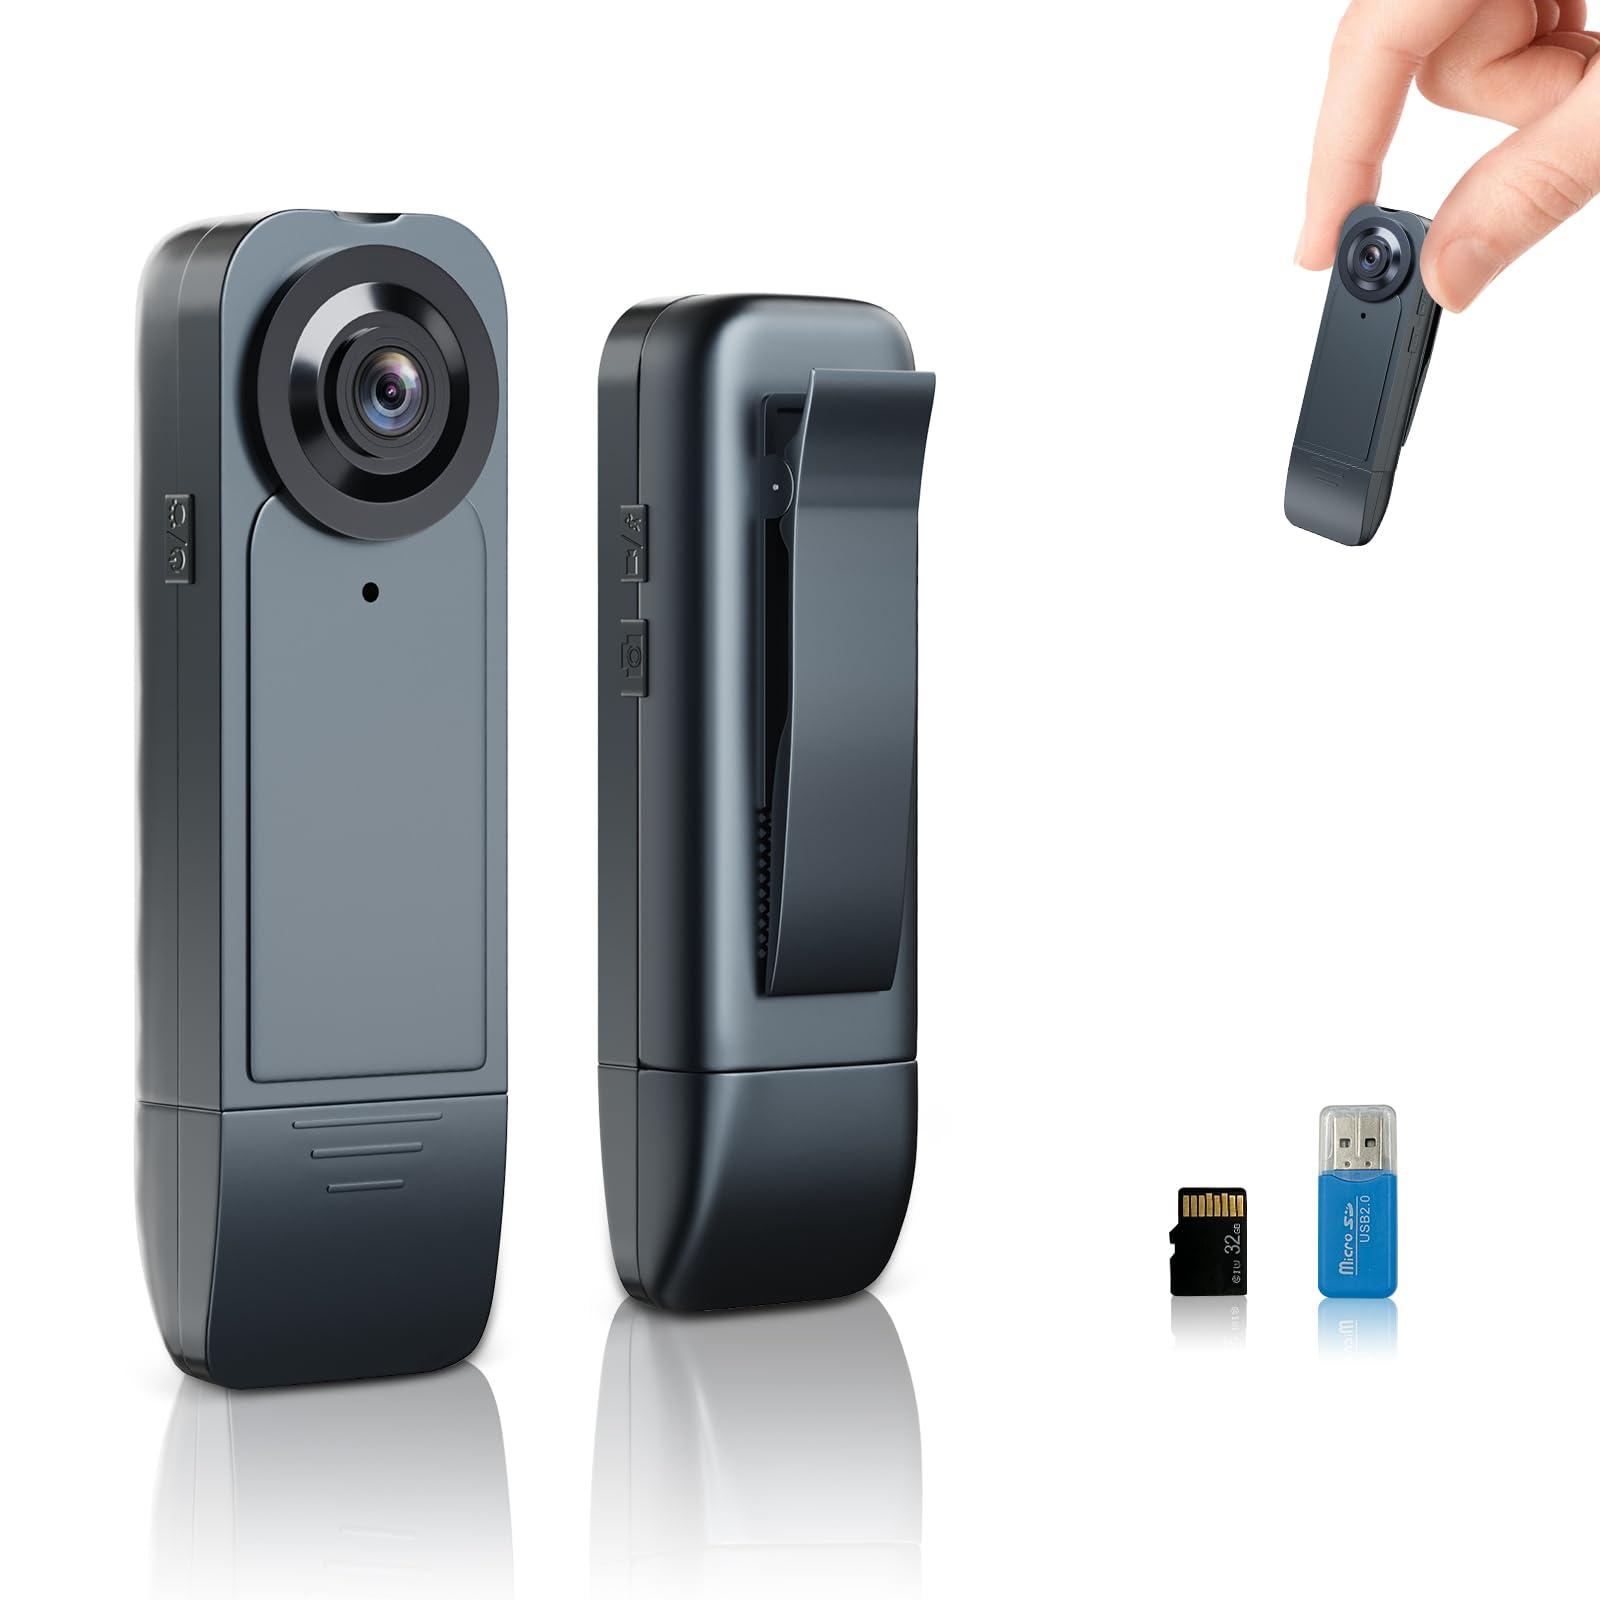 Brathird Mini Body Camera - 1080P 64GB Body Worn Camera for Cycling, Home, and Office Security